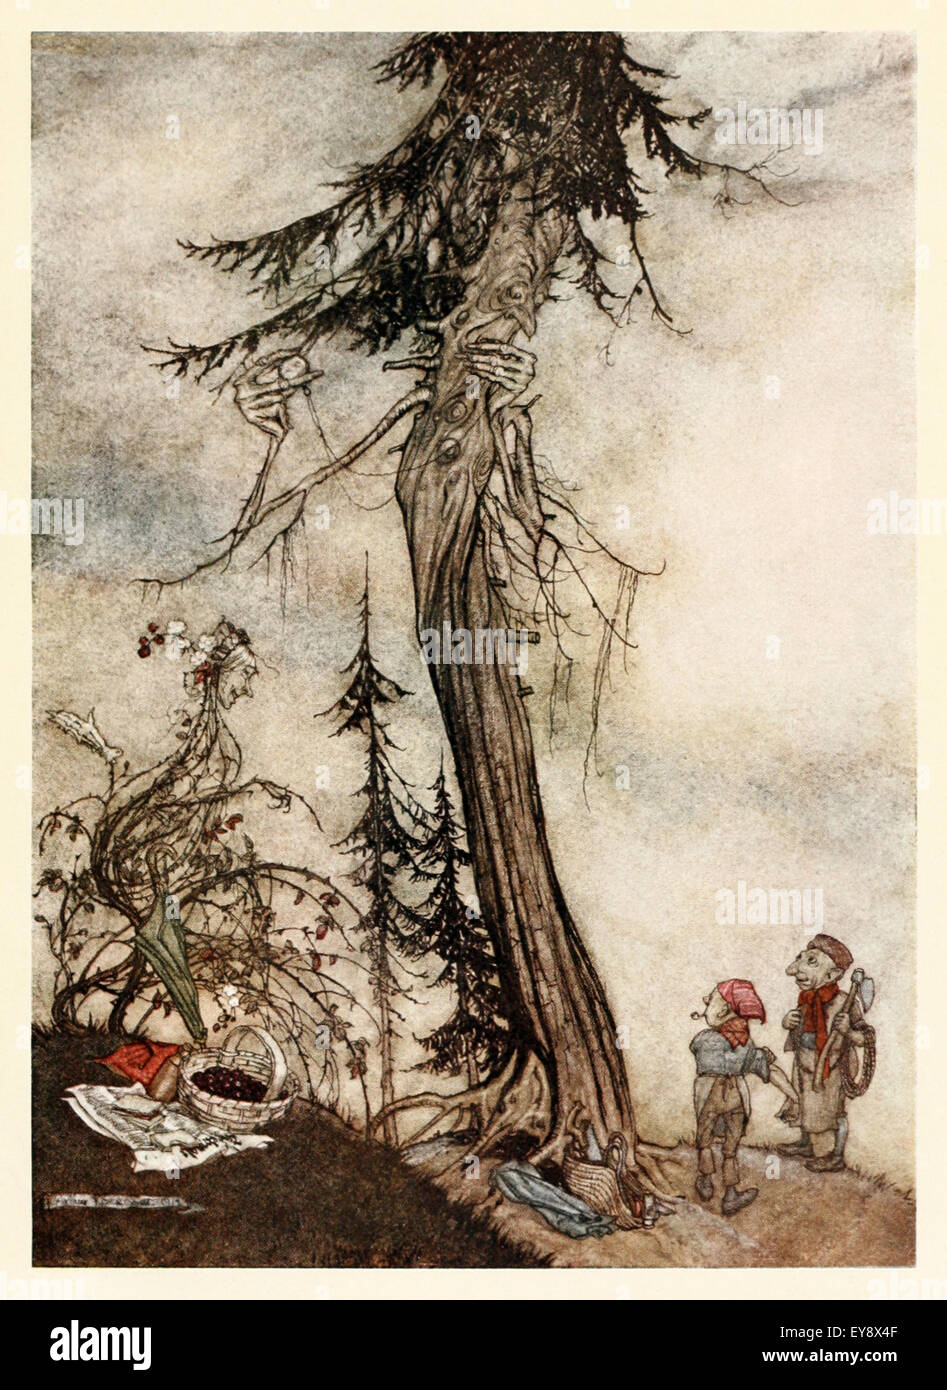 The fir tree and the bramble' fable by Aesop (circa 600BC). Fir tree boasts of his usefulness to the bramble, who replies you'll wish you were like me when they come for you with axes. Moral: Better poverty without a care than wealth with its many obligations. Illustration by Arthur Rackham (1867-1939). See description for more information. Stock Photo